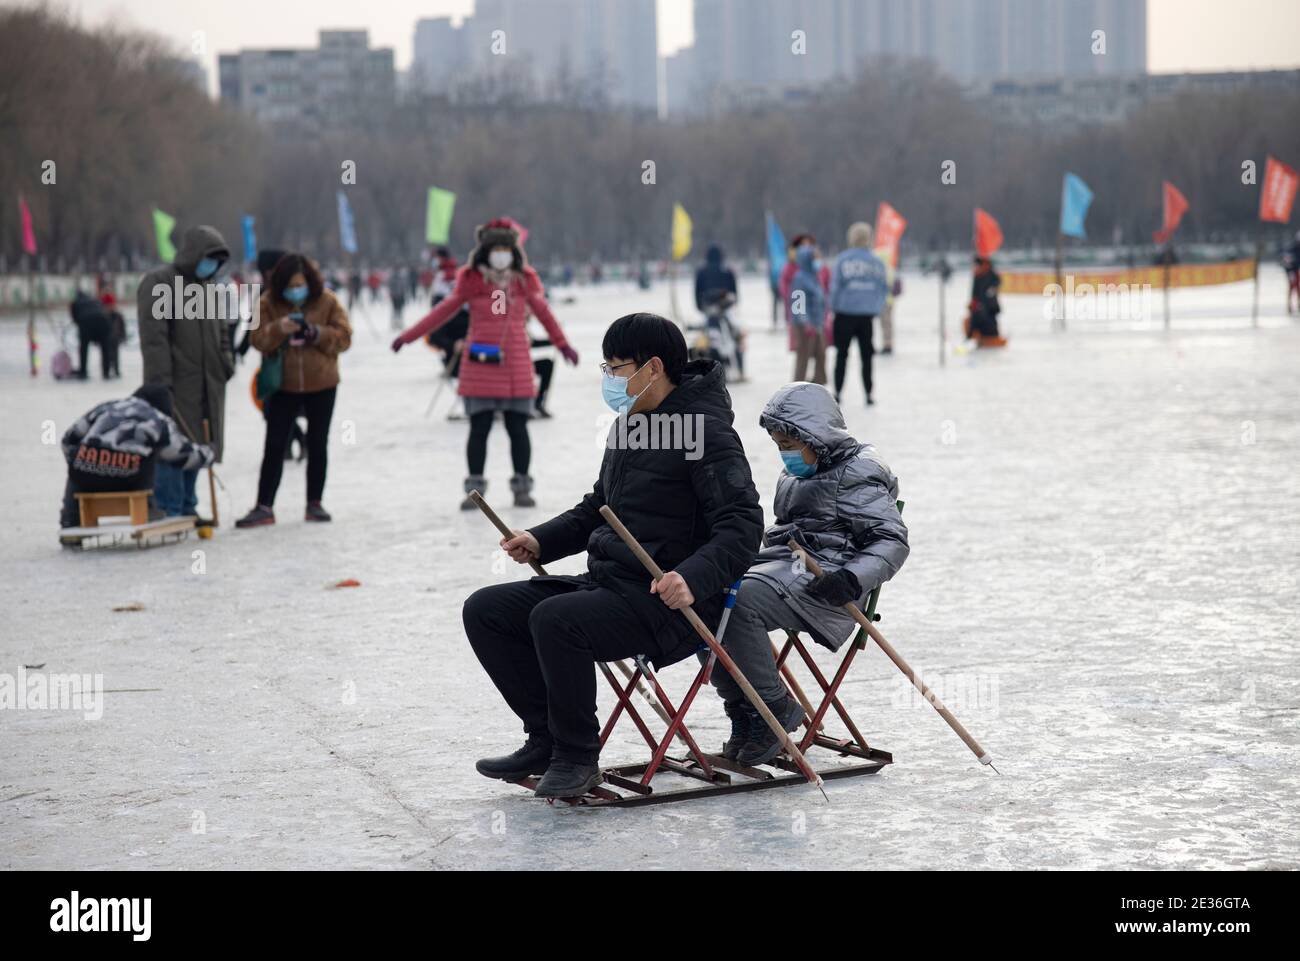 Citizens come to the park to skate and enjoy the joy brought by sports after skating rinks reopen in Shenyang city, northeast China's Liaoning provinc Stock Photo